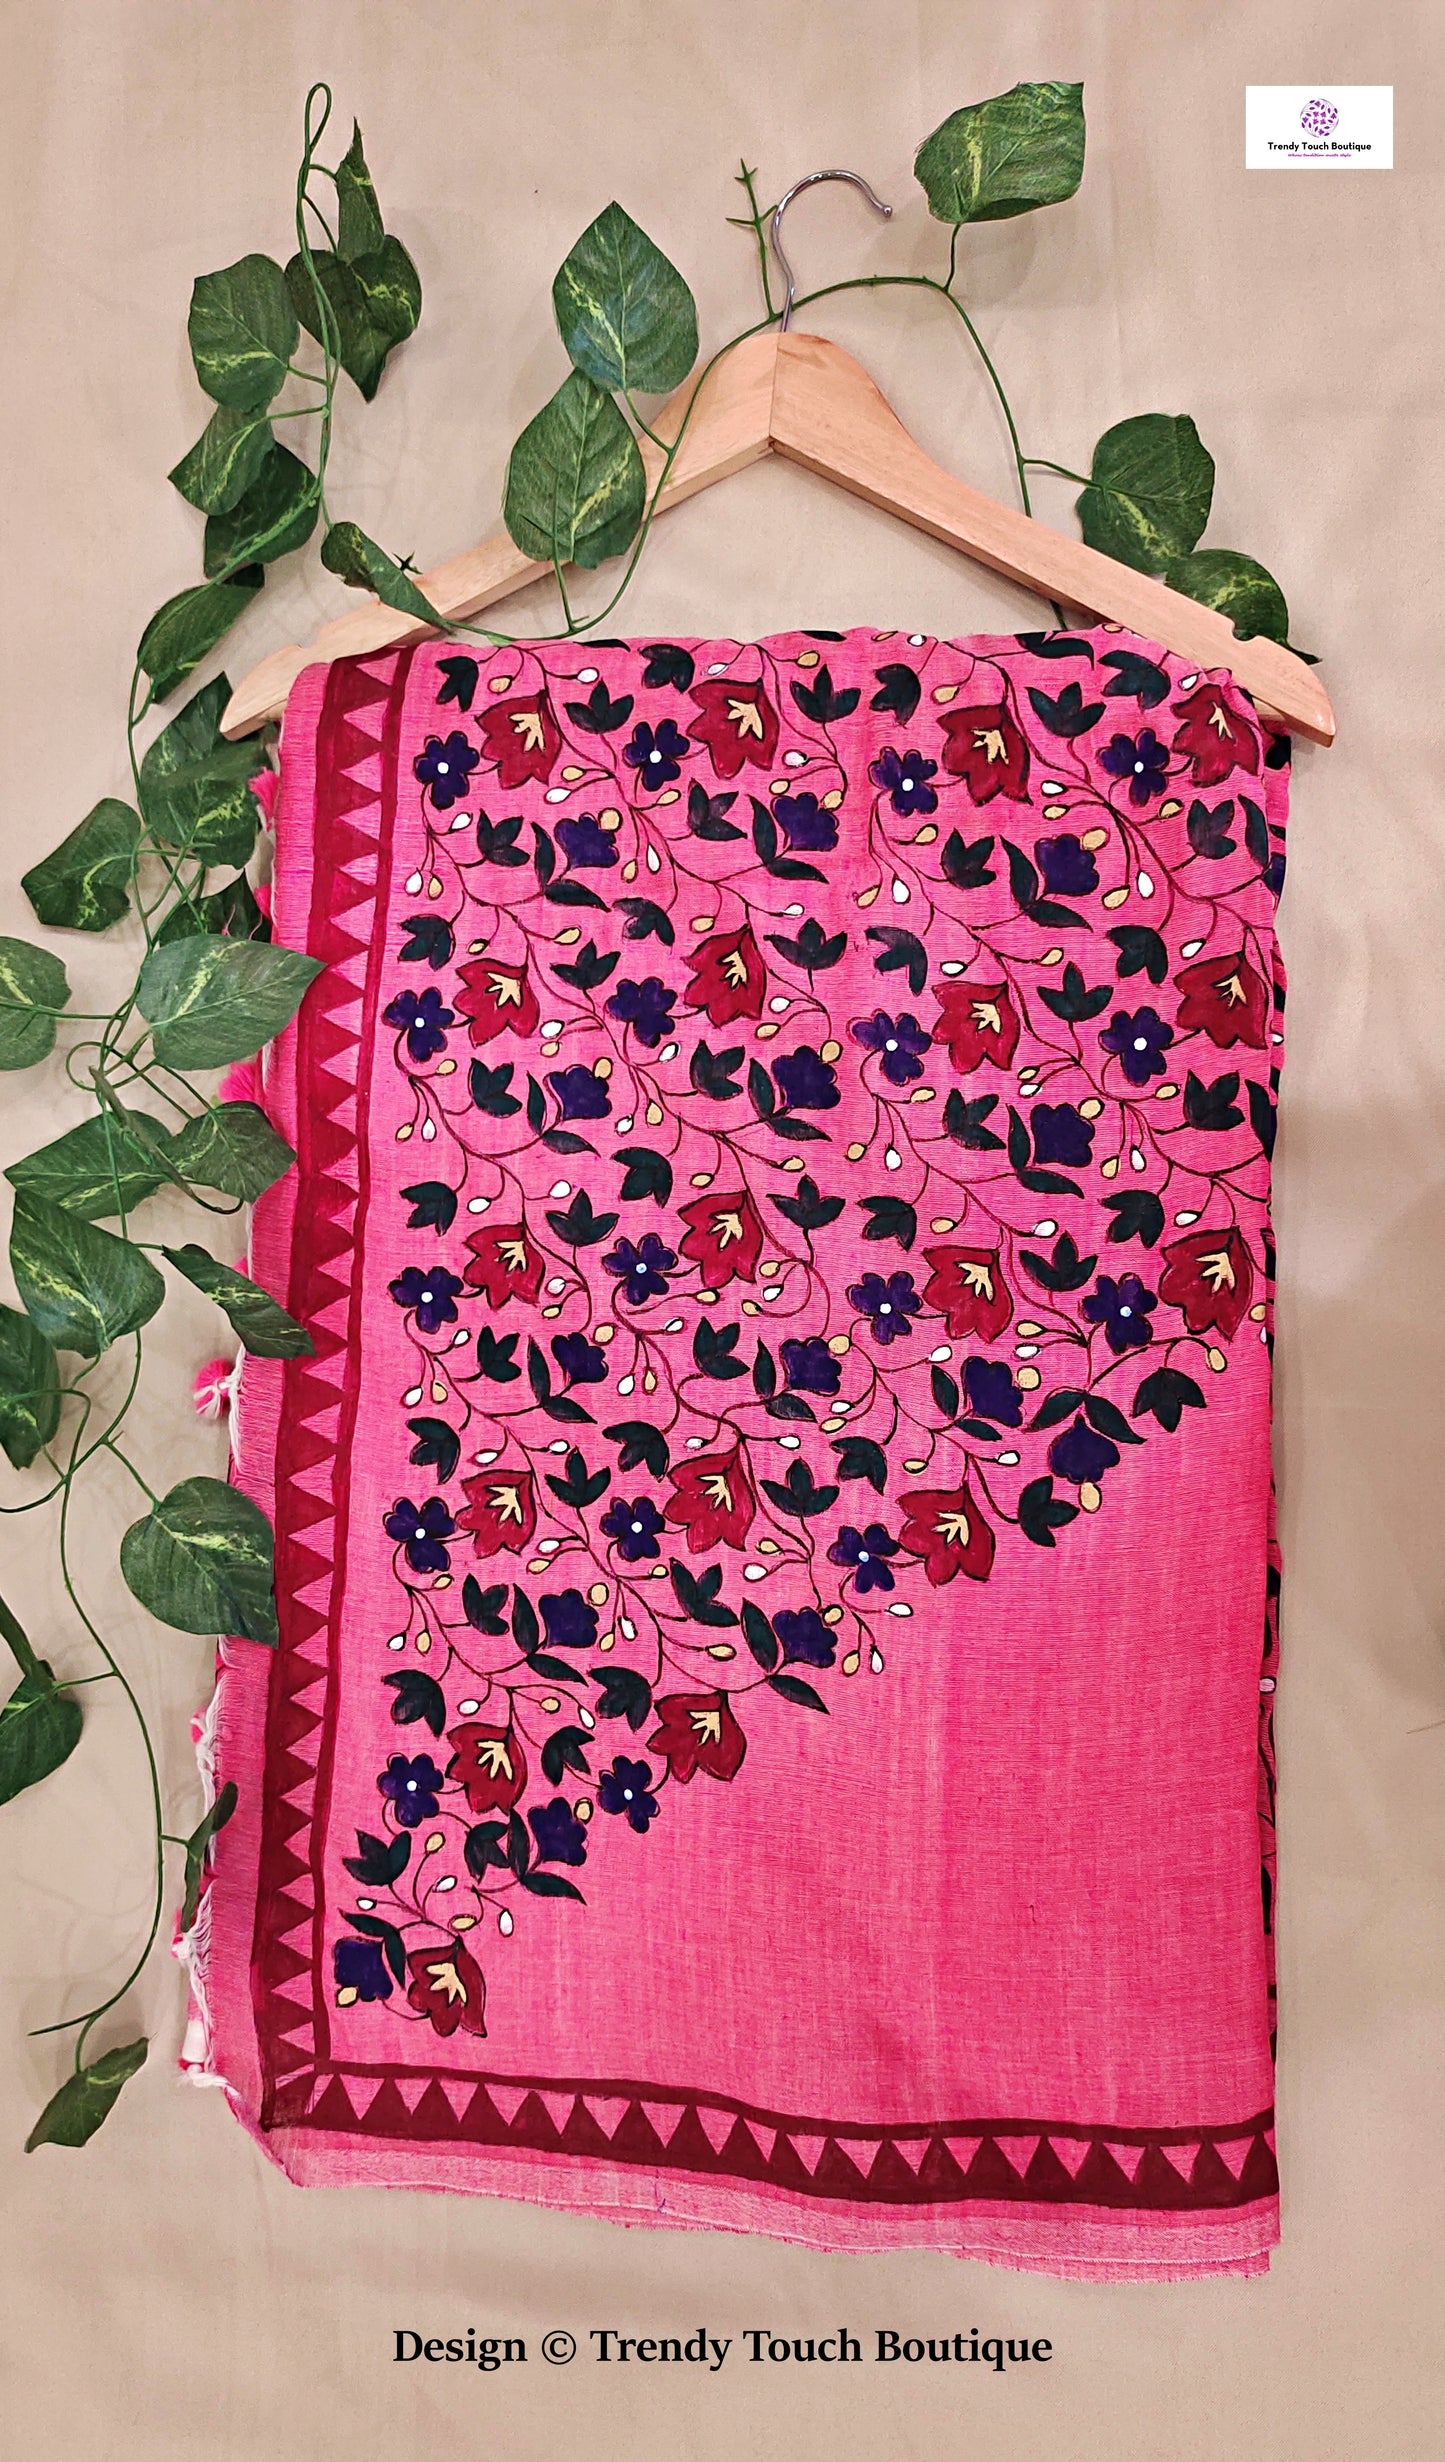 Buy Hand Painted sarees online at Best prices in India.